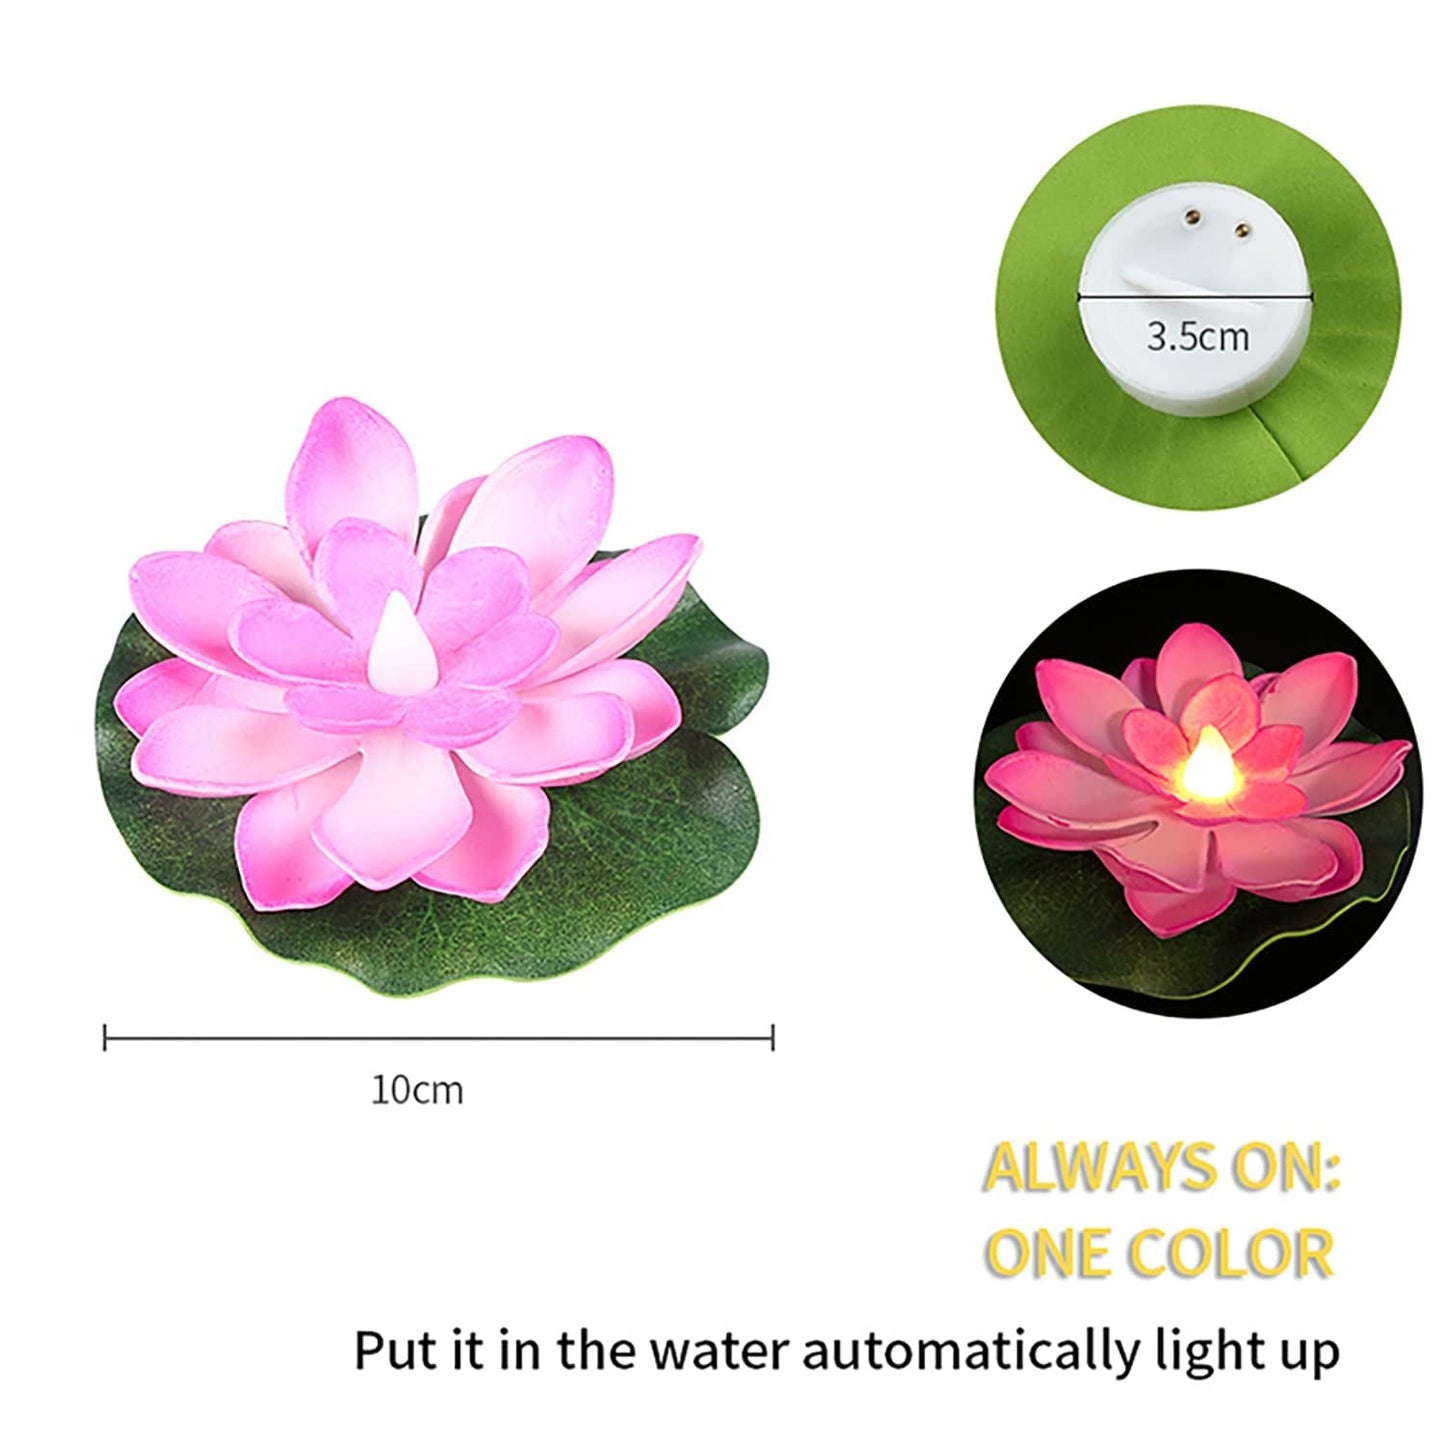 6556 Water Floating Smokeless Candles & Lotus Flowers Sensor Led TeaLight for Outdoor and Indoor Decoration - Pack of 6 Candle Candle (Pack of 6)